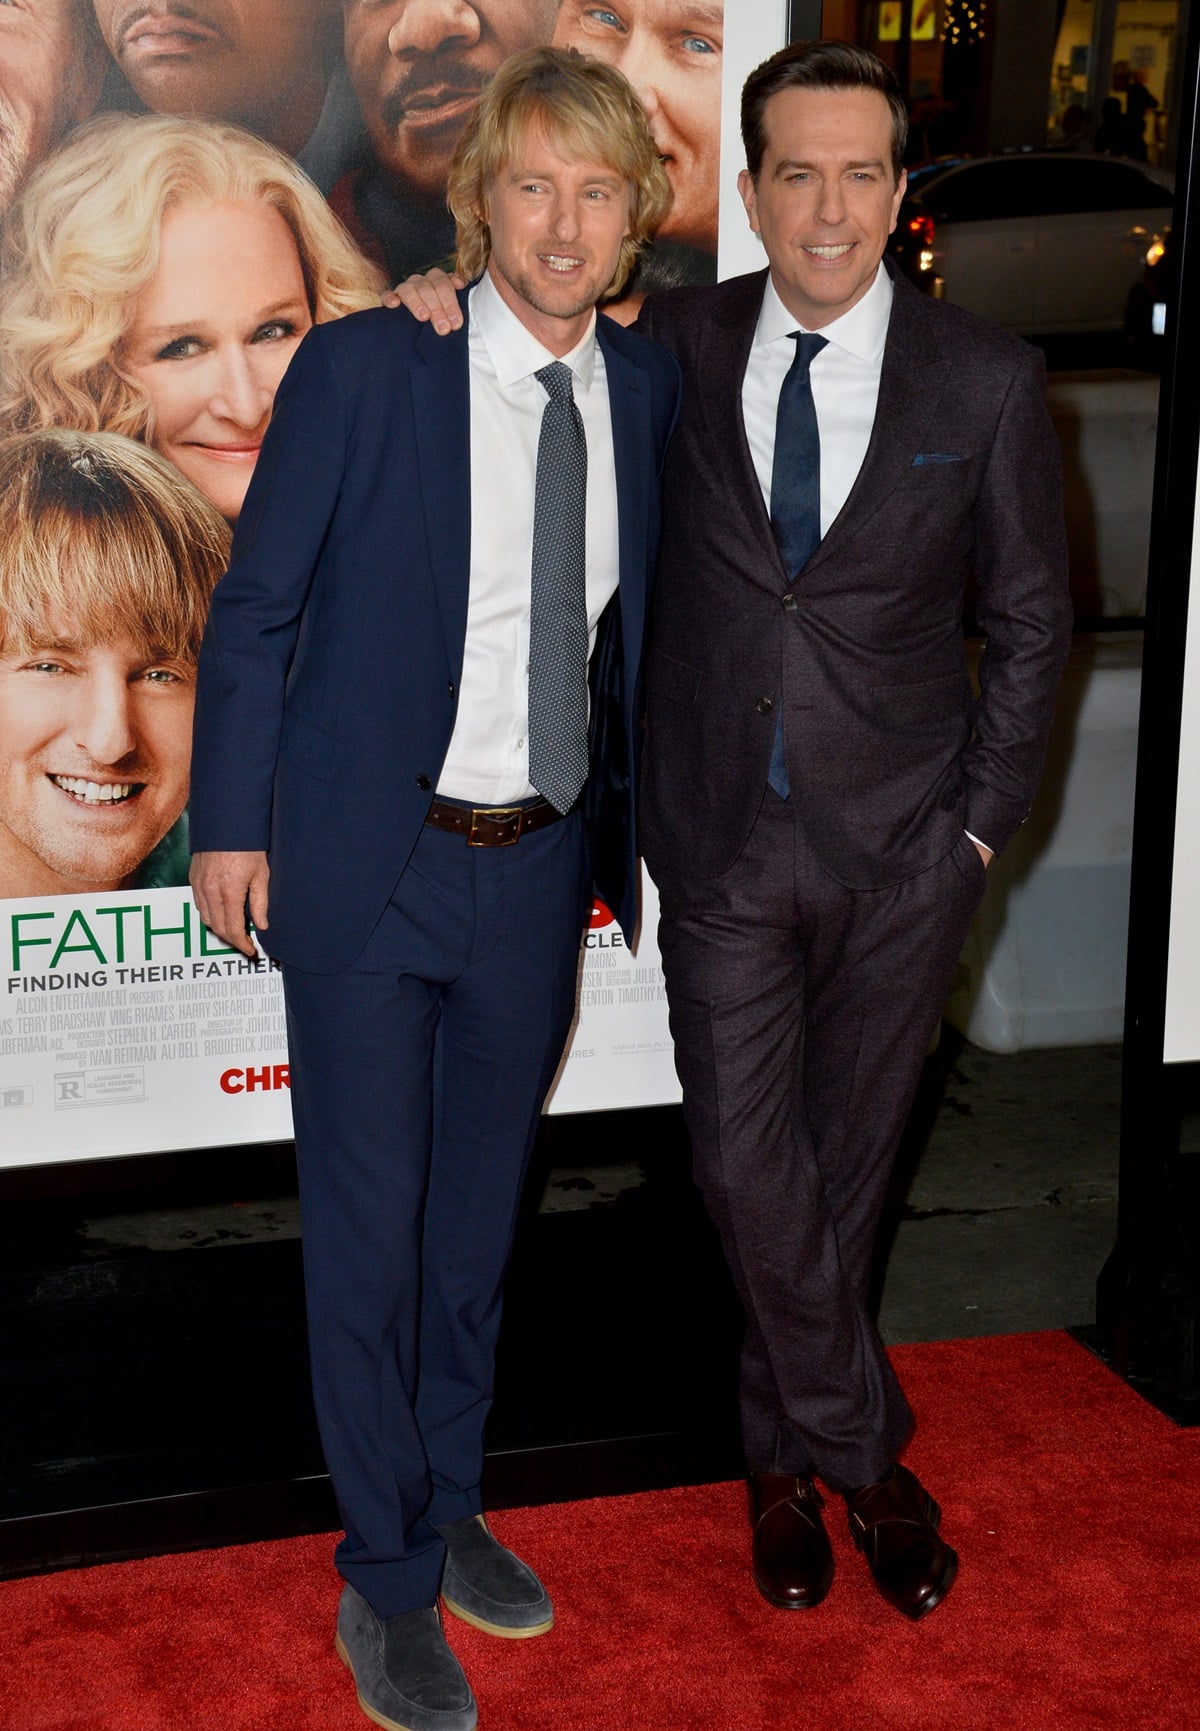 Ed Helms, at a height of 5ft 11 ½ (181.6 cm), is slightly taller than Owen Wilson, who stands at 5ft 10 ½ (179.1 cm), with a 1-inch (2.5 cm) difference